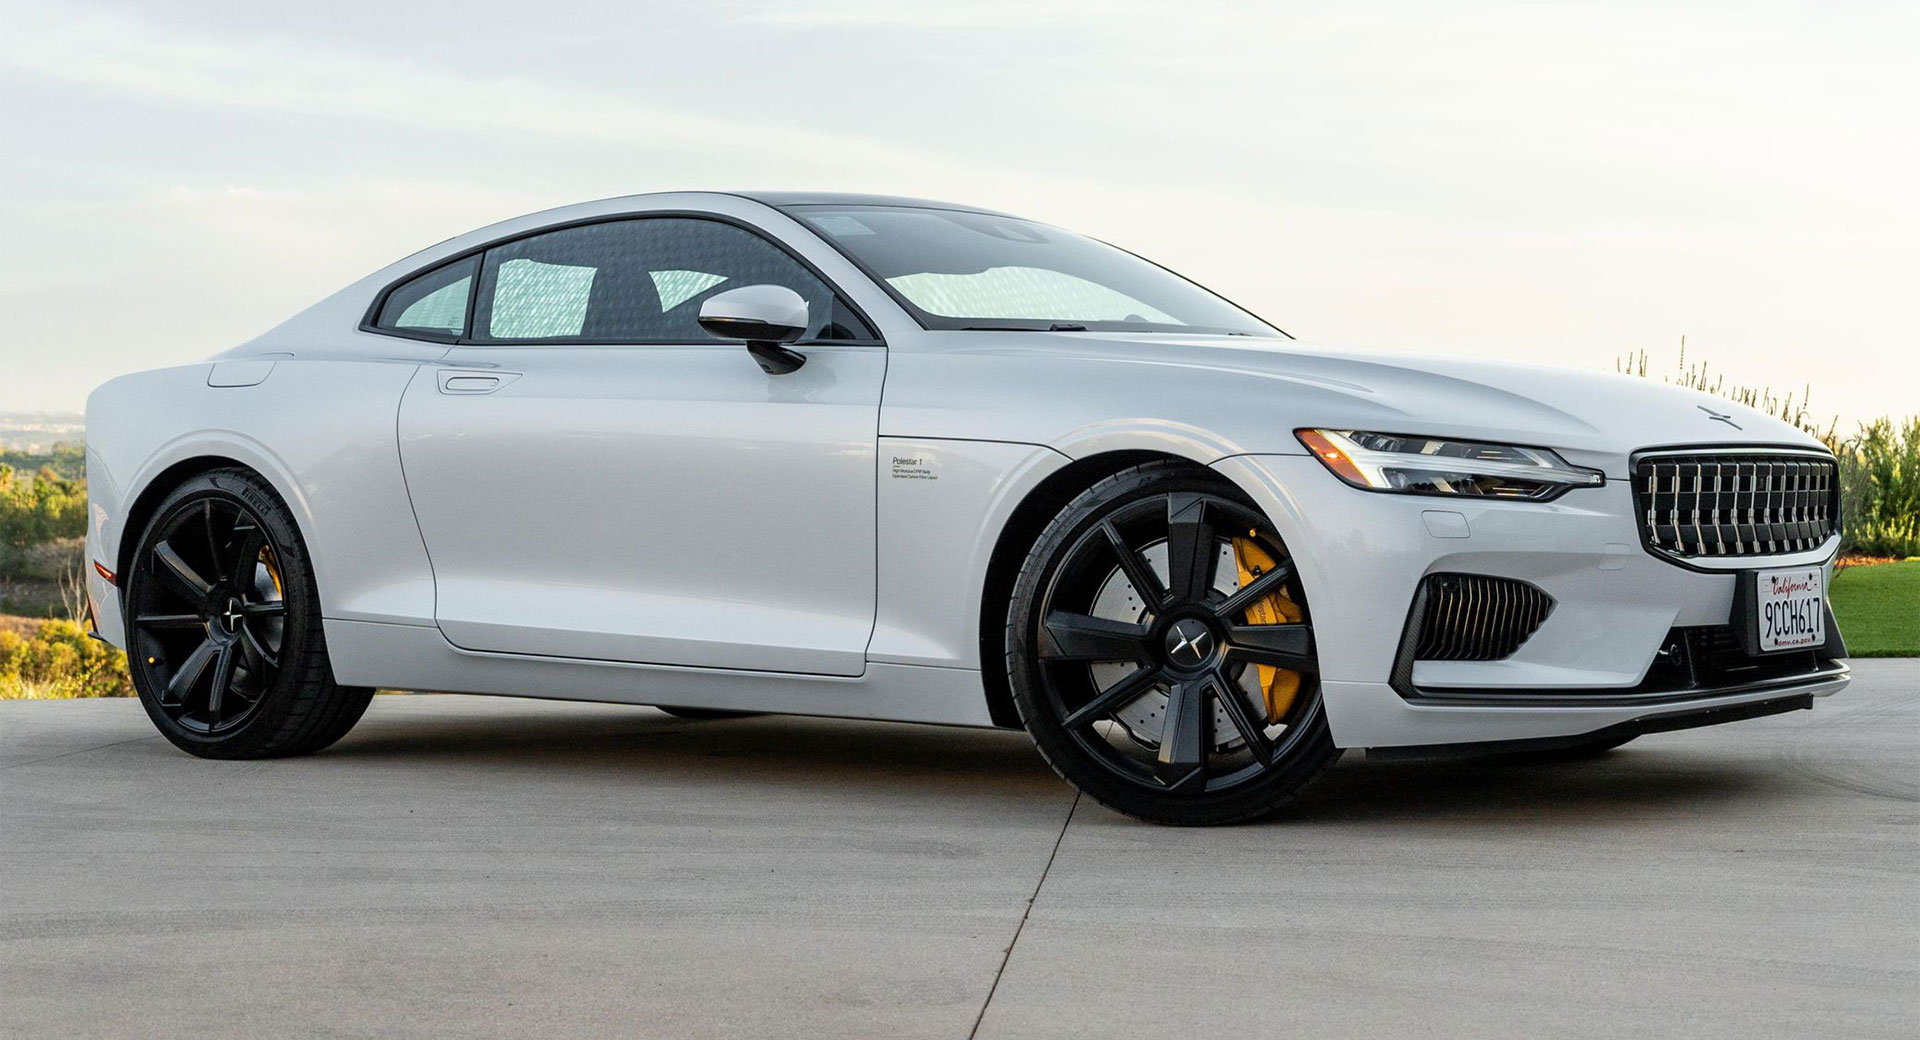 Fancy Owning The 619 HP Polestar 1 Of Automaker’s CEO?